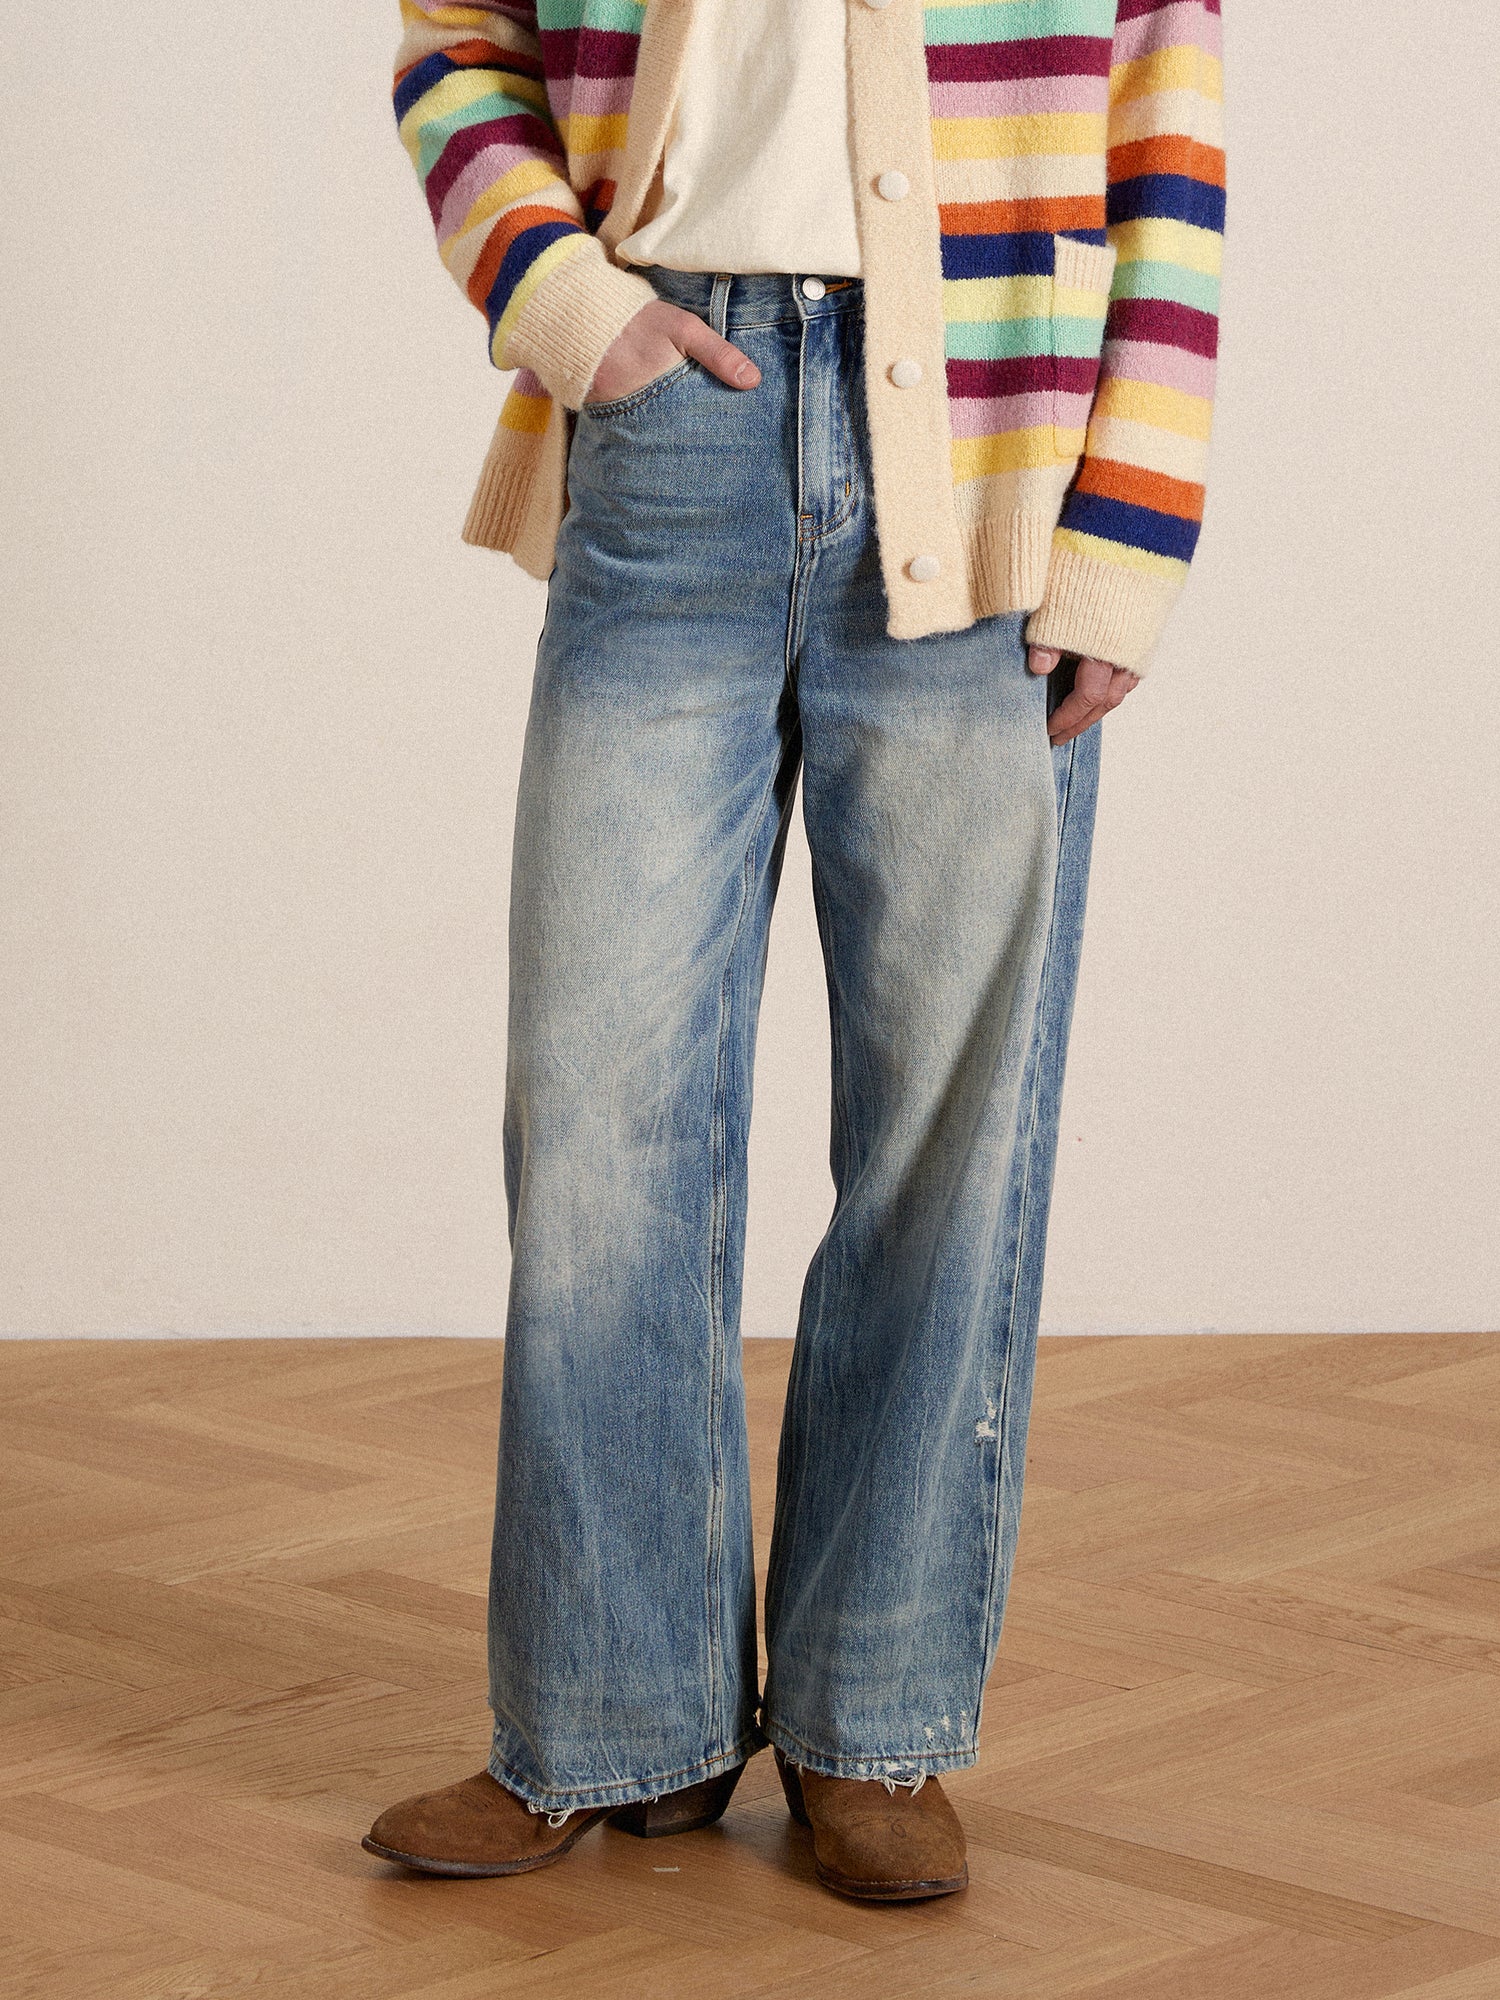 A person wearing Found's Lacy Baggy Jeans, striped sweater, and beige cardigan, standing in a room with wooden flooring.